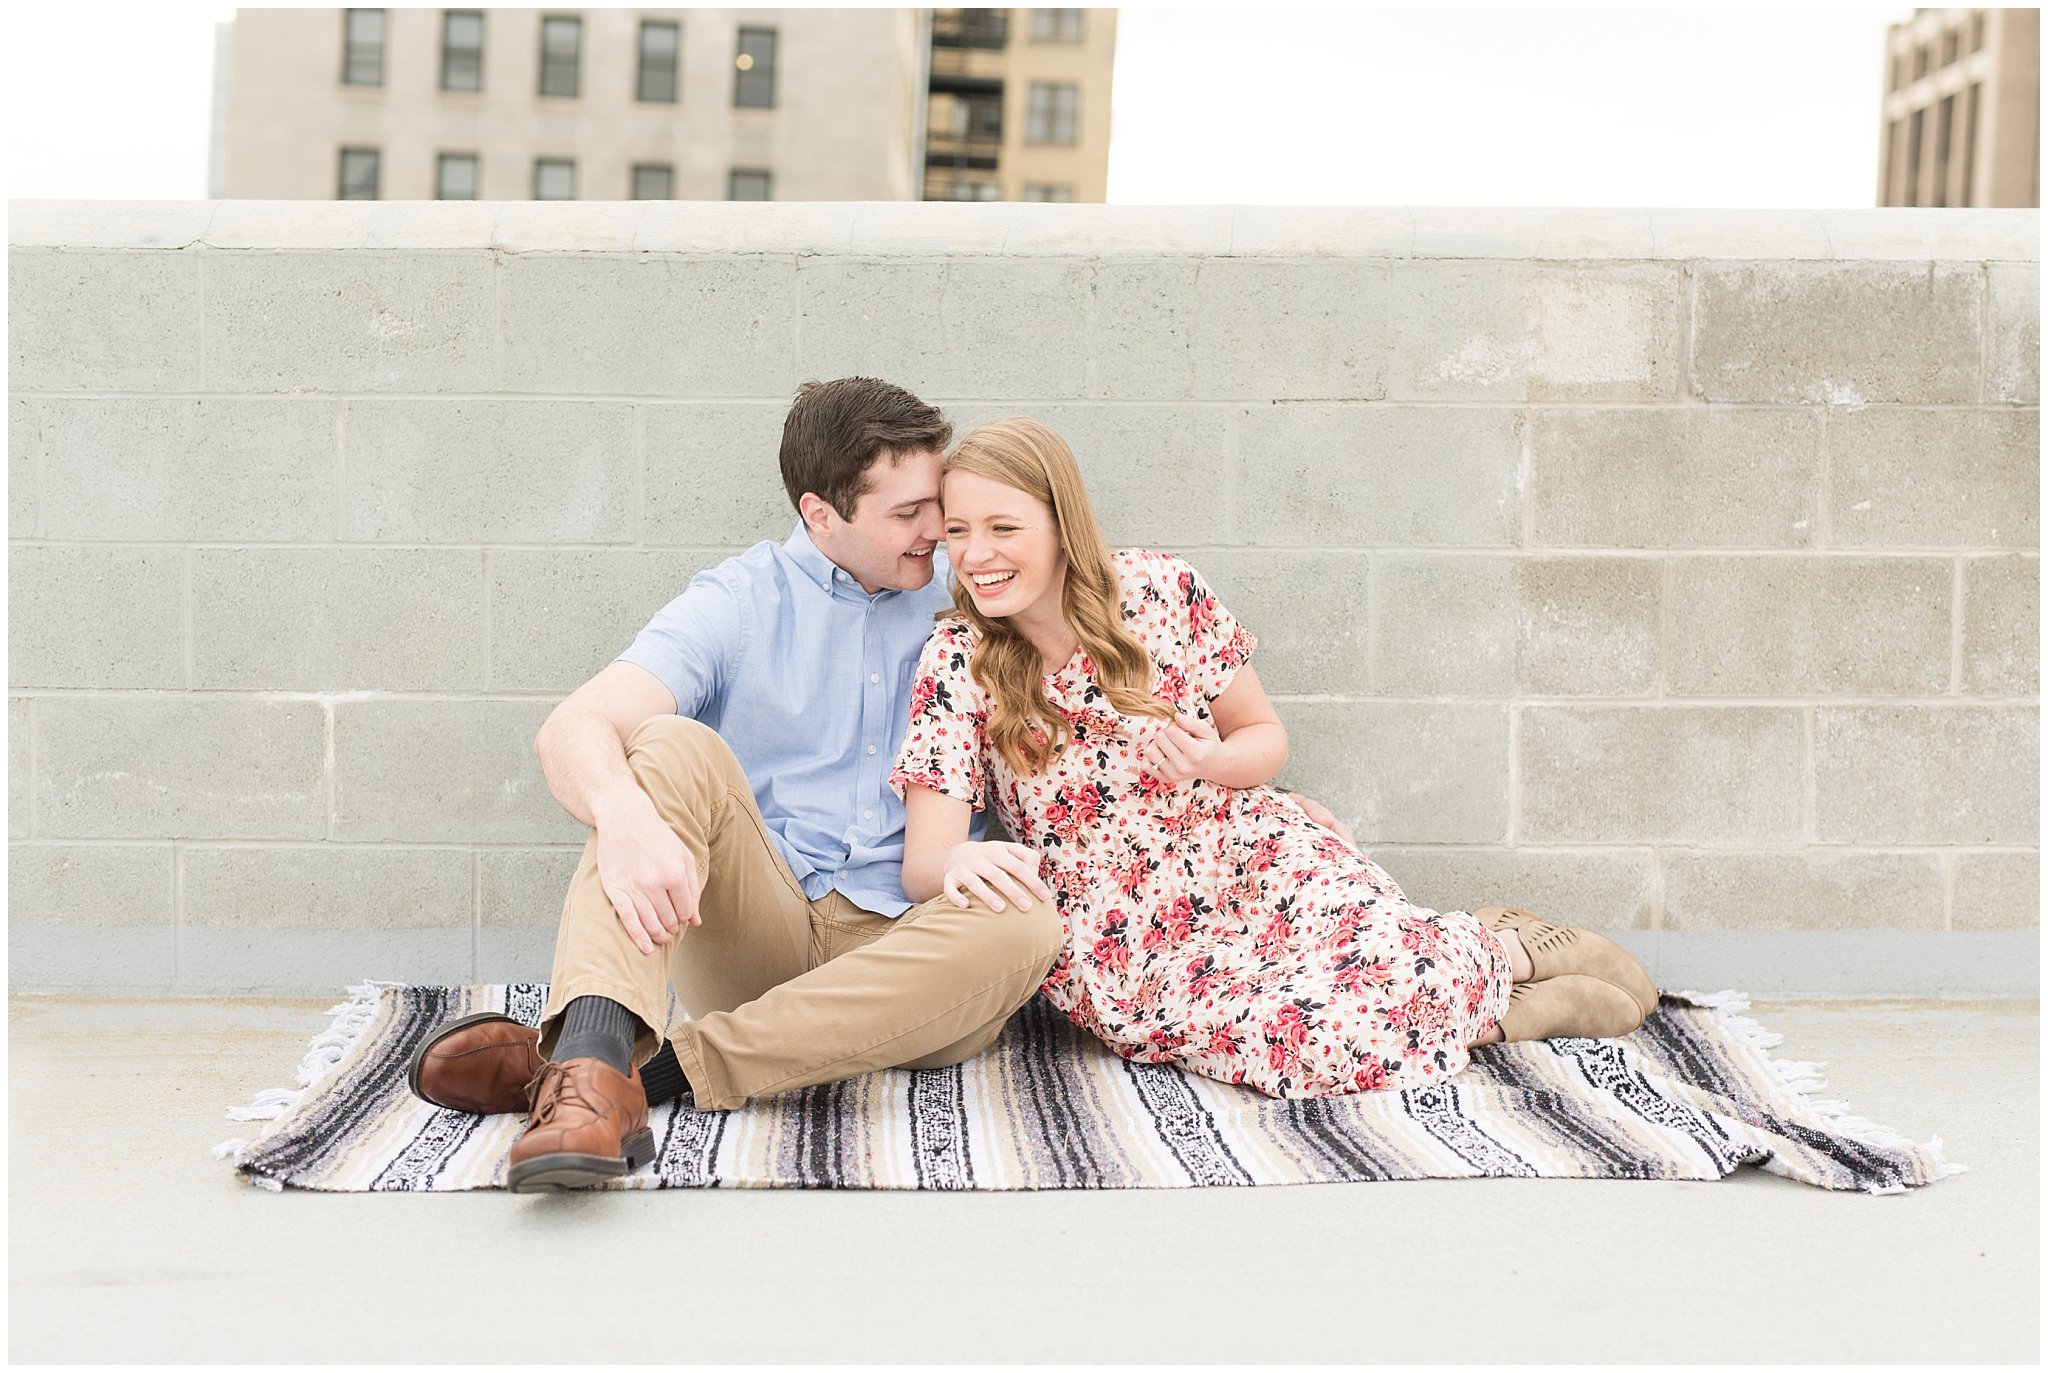 Couple snuggled on rooftop | Downtown Salt Lake and Ensign Peak Engagement | Utah Wedding Photographers | Jessie and Dallin Photography